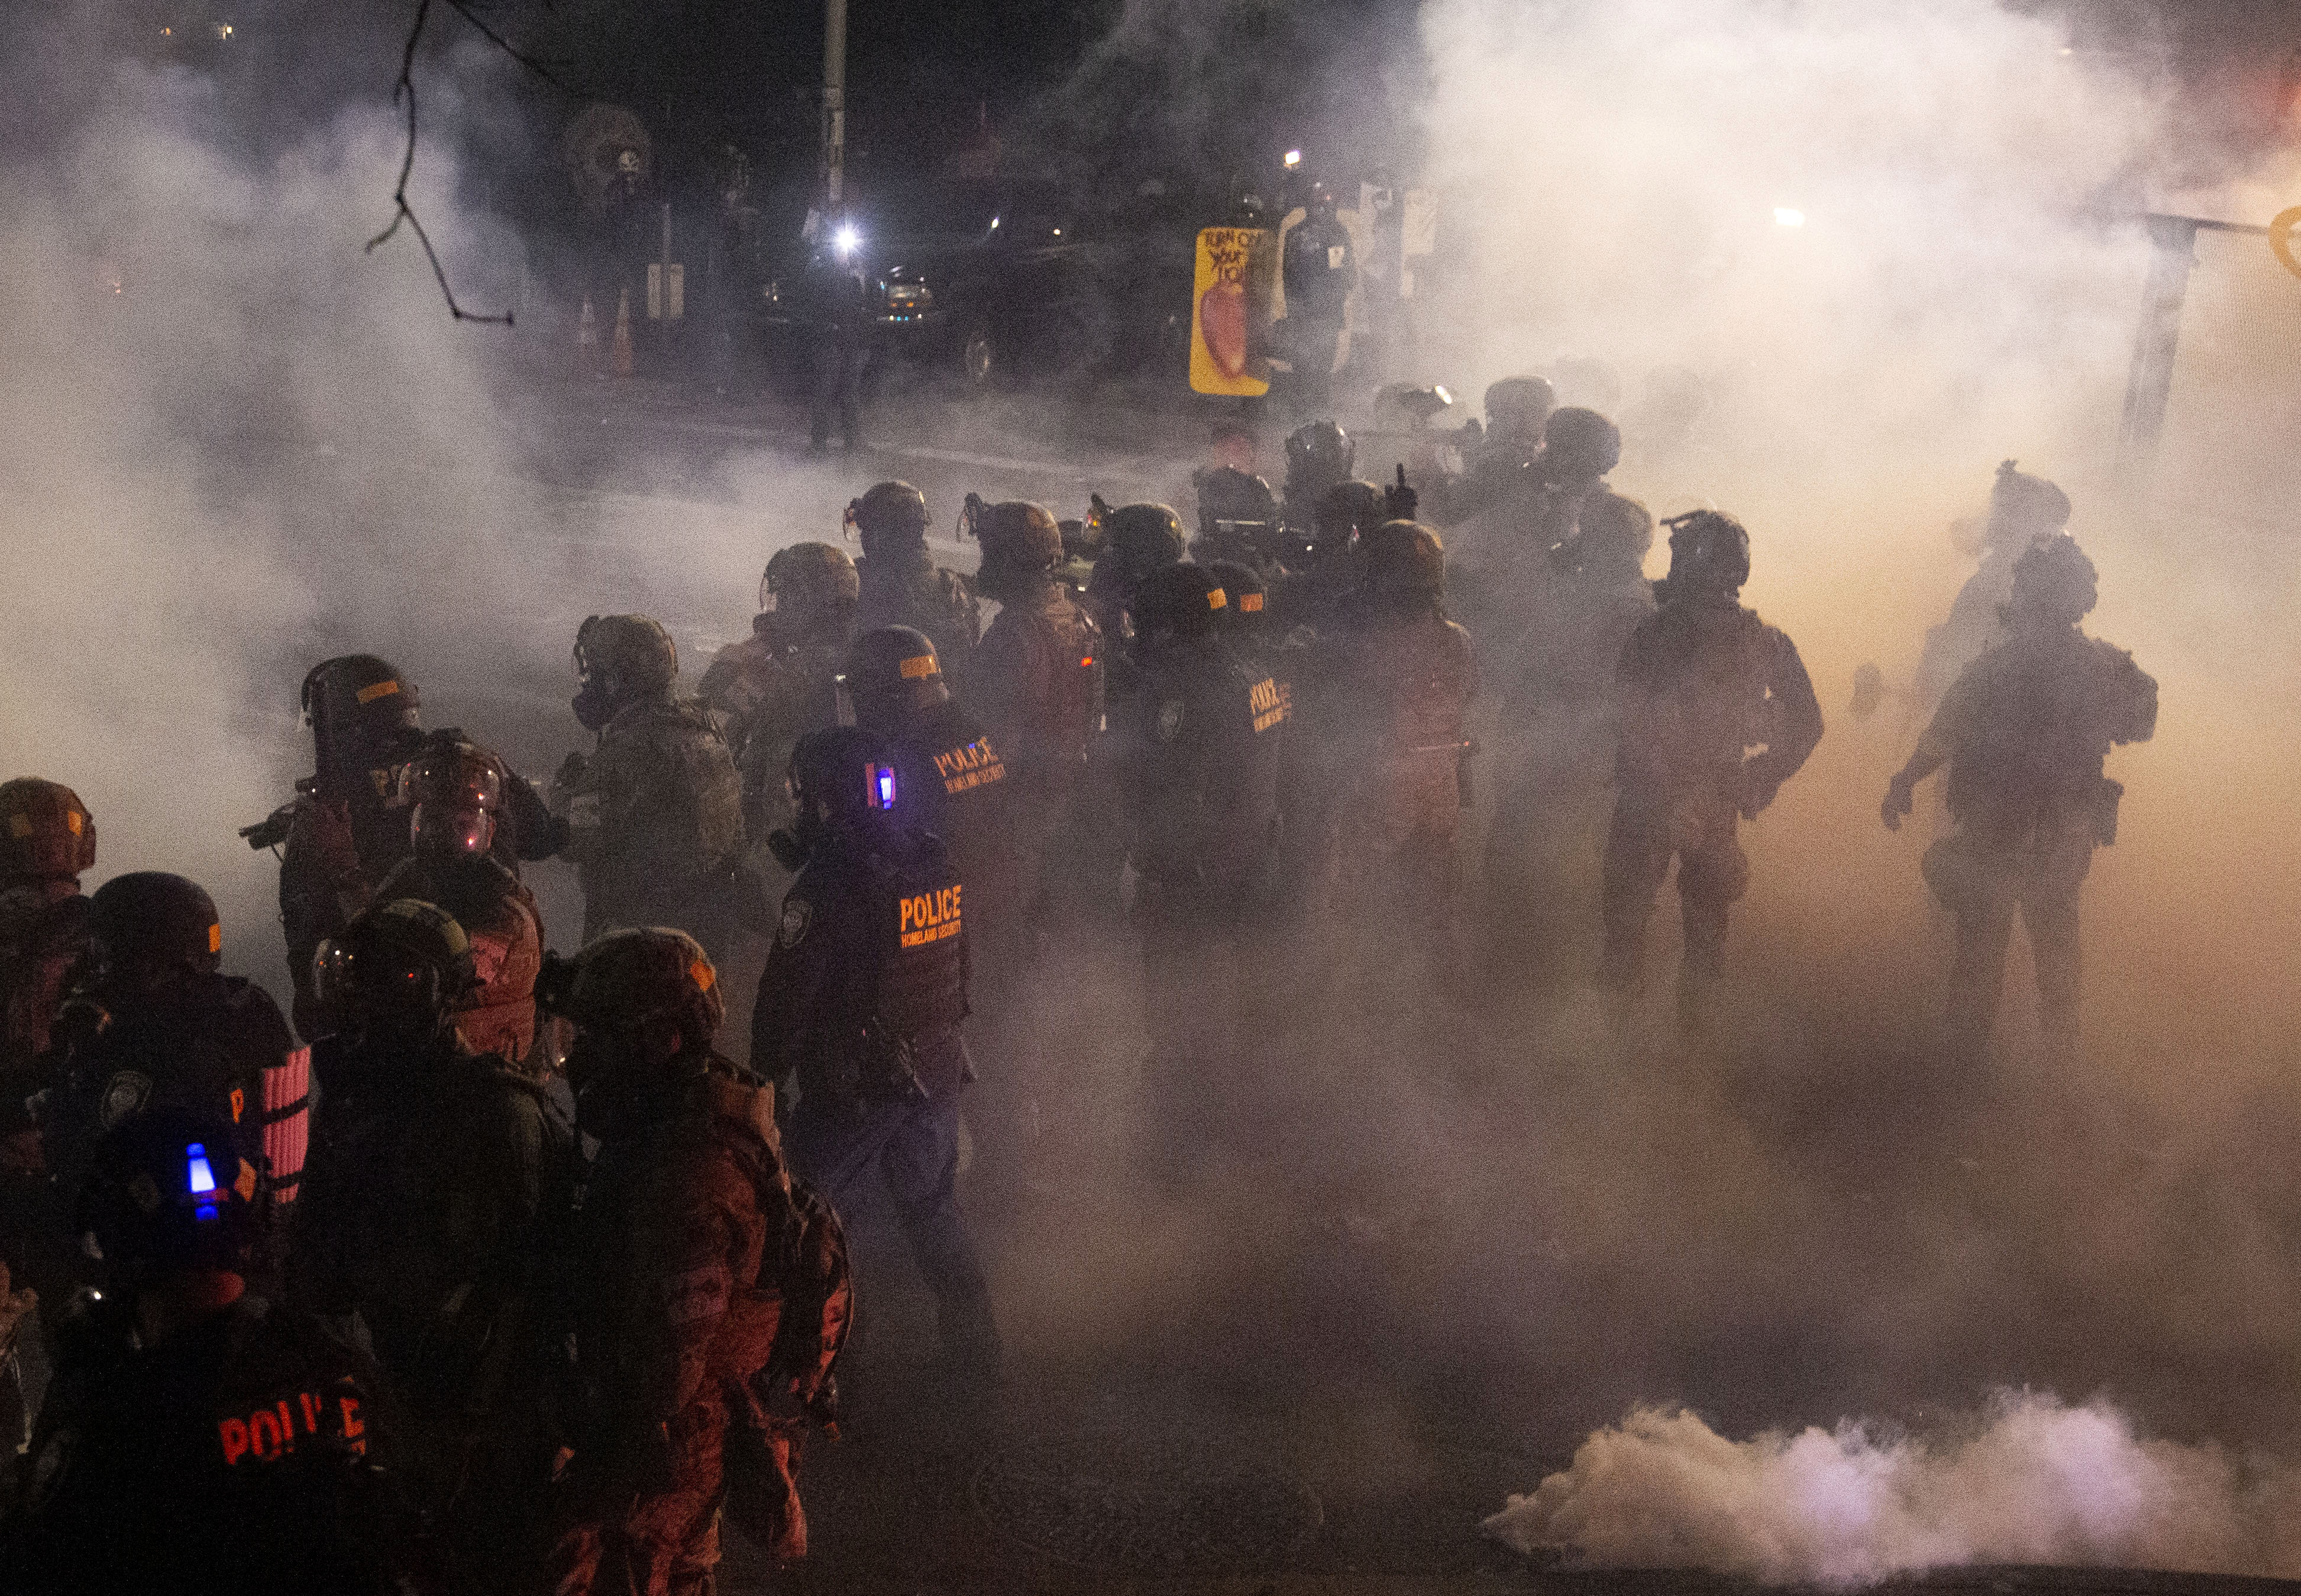 Dramatic scenes play out in the early morning hours of a declared disturbance on the 57th night of protest in Portland, July 23, 2020. Beth Nakamura/Staff